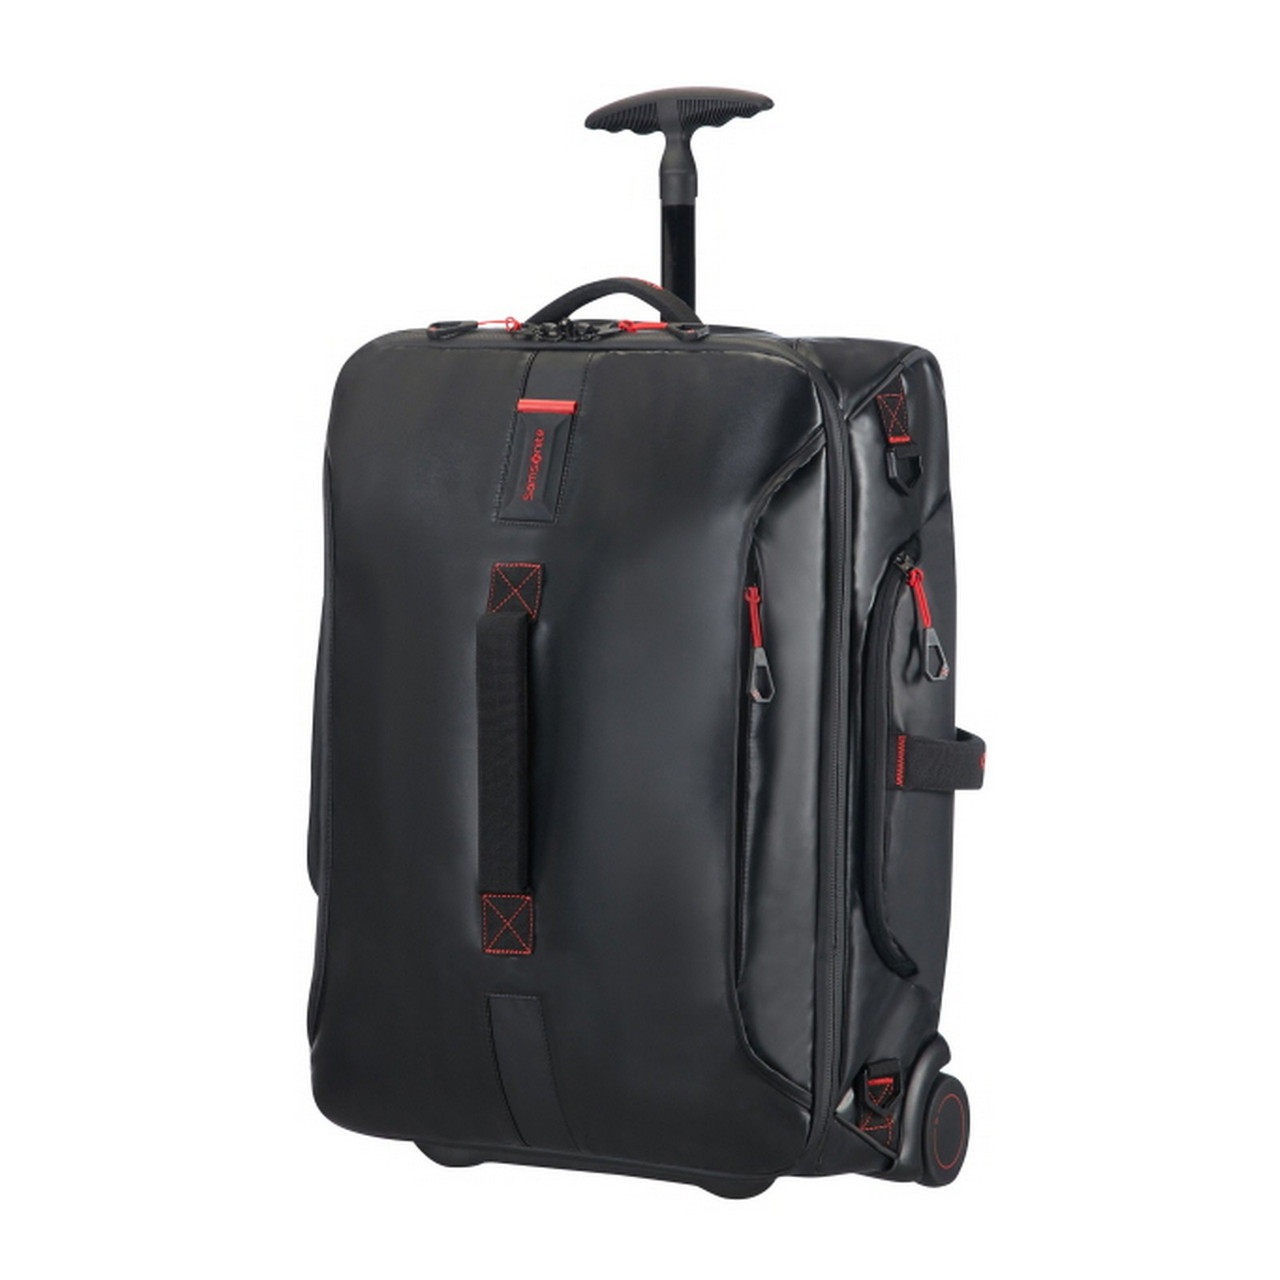 Small Cabin Suitcase (55 cm) - Polyester Lightweight Trolley/Suitcase Bag  Suitcase Bag With Wheels For Men and - Blue Price in India, Full  Specifications & Offers | DTashion.com